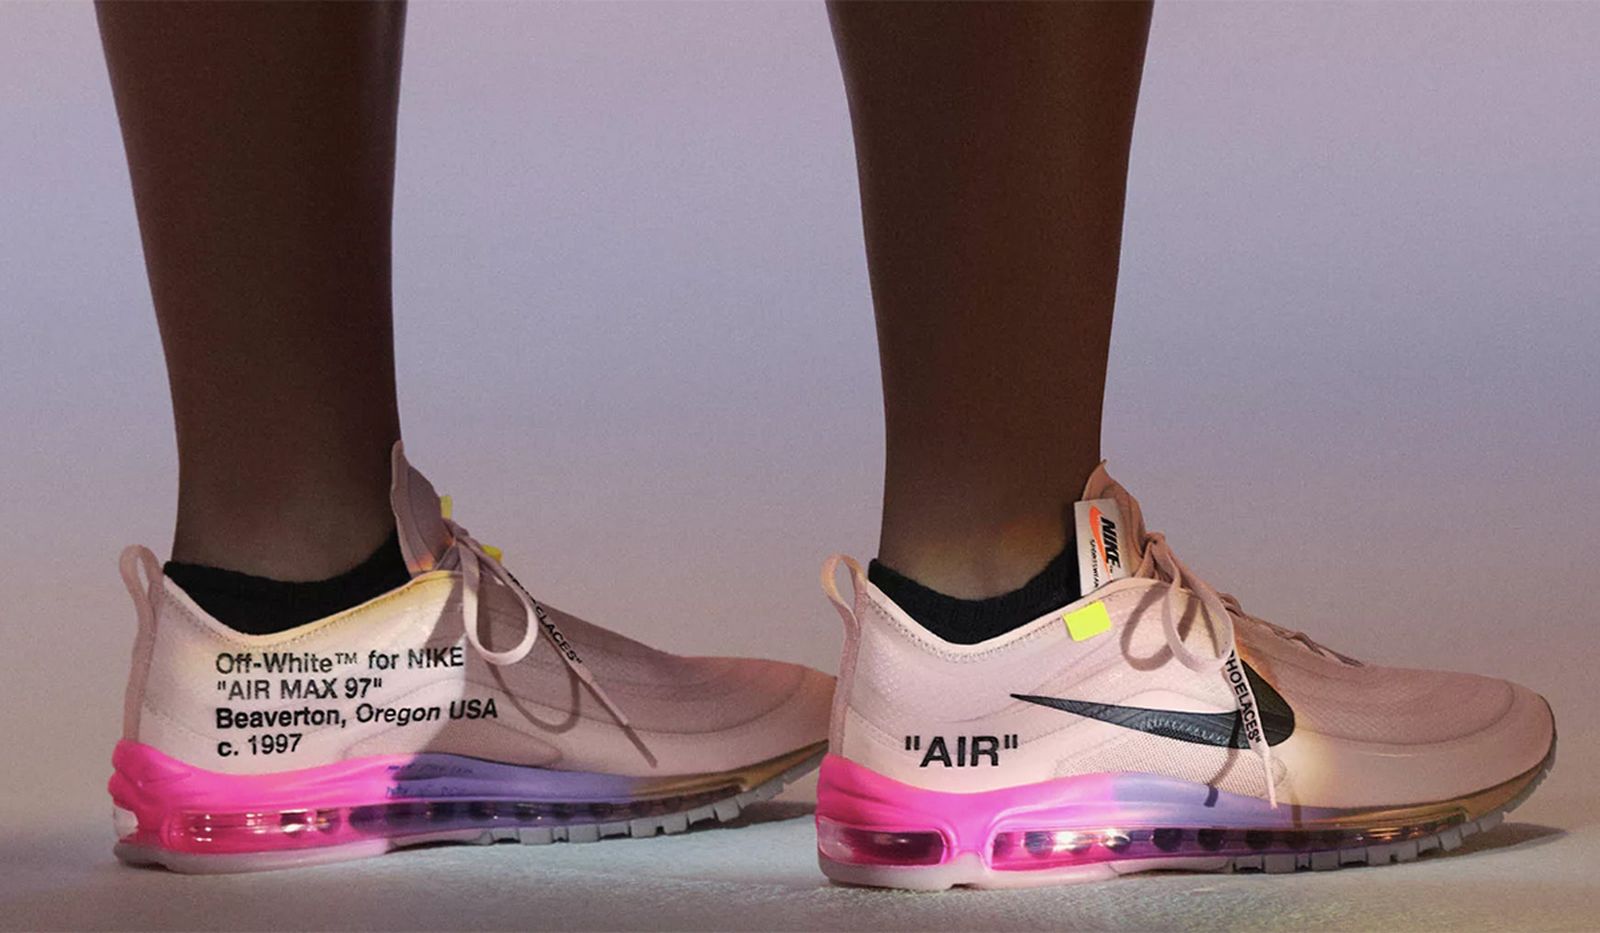 OFF-WHITE x off white 97 Nike Air Max 97 “Queen”: Official Release Info